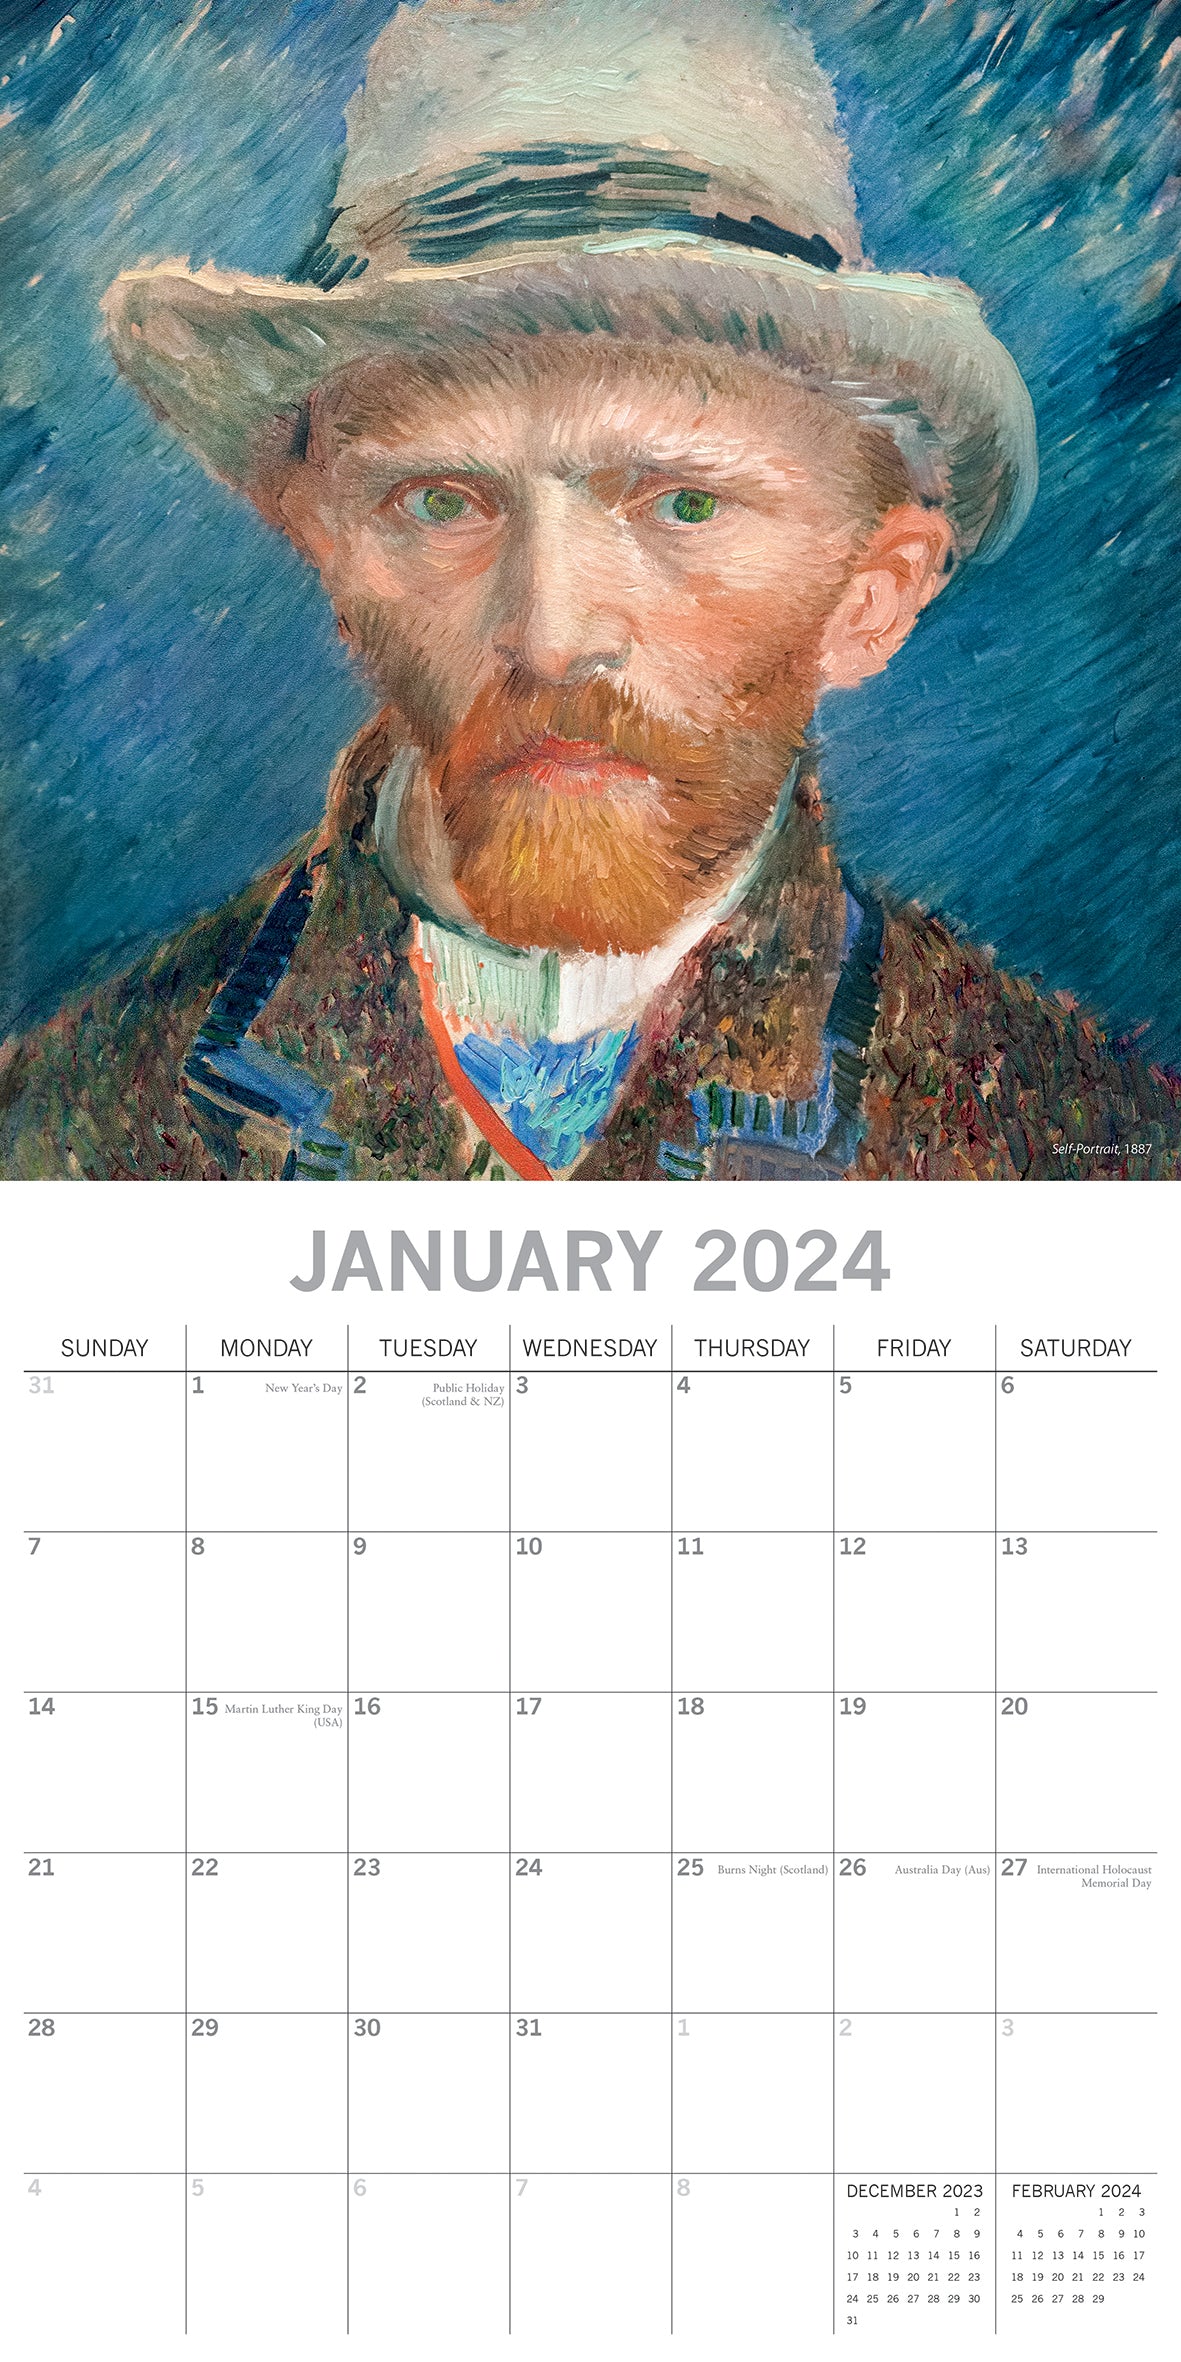 Van Gogh 2024 Square Wall Calendar 16 Month Arts Planner Christmas New Year Gift